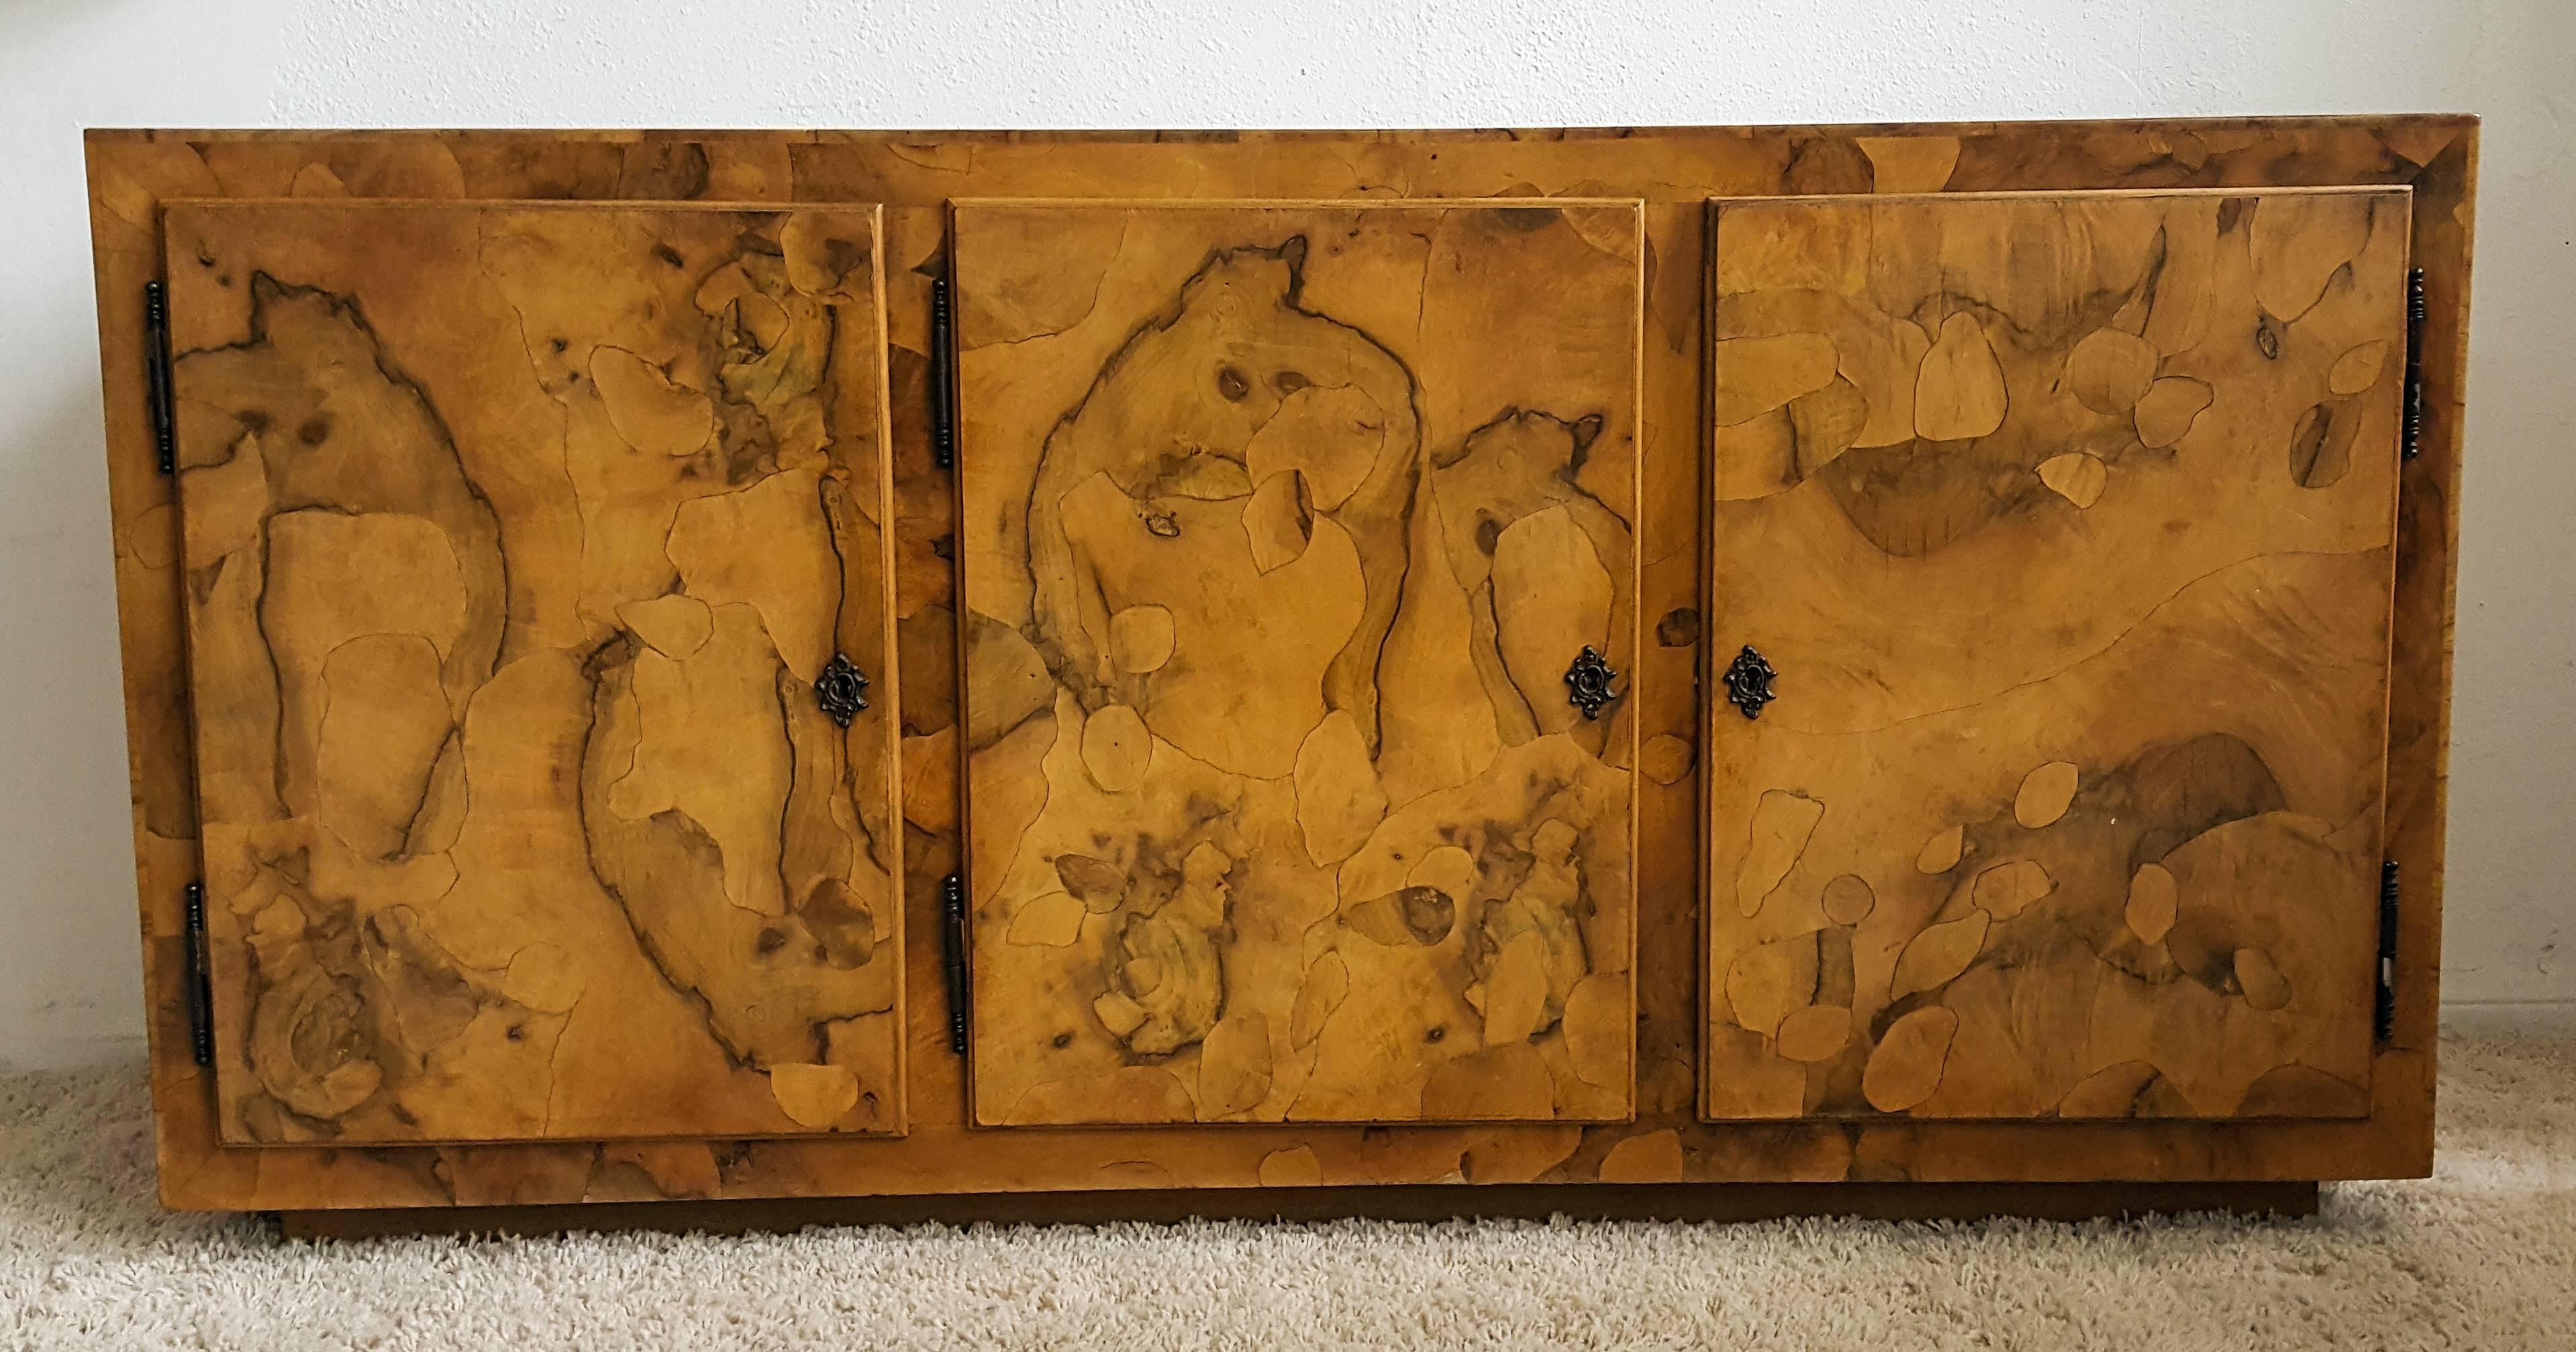 This credenza is stunning! The credenza features a fine patchwork burl design that mimics an almost tortoise shell finish. The craftsmanship on this piece can be seen in the attention to detail. Comes with its original skeleton key.